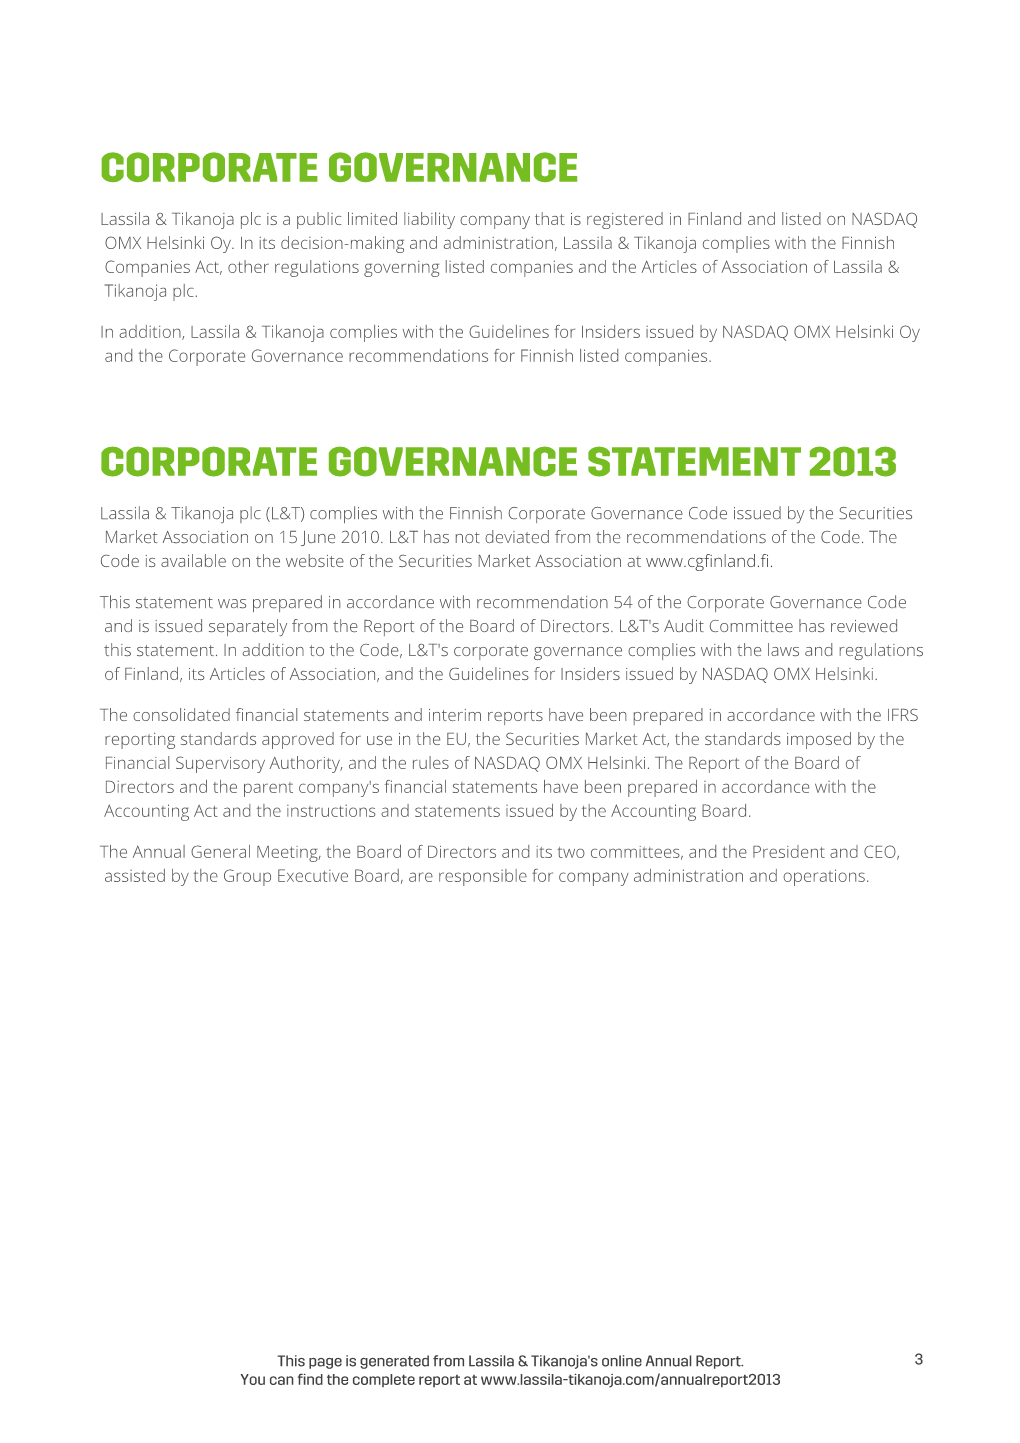 L&T Financial Statements and Corporate Governance 2013